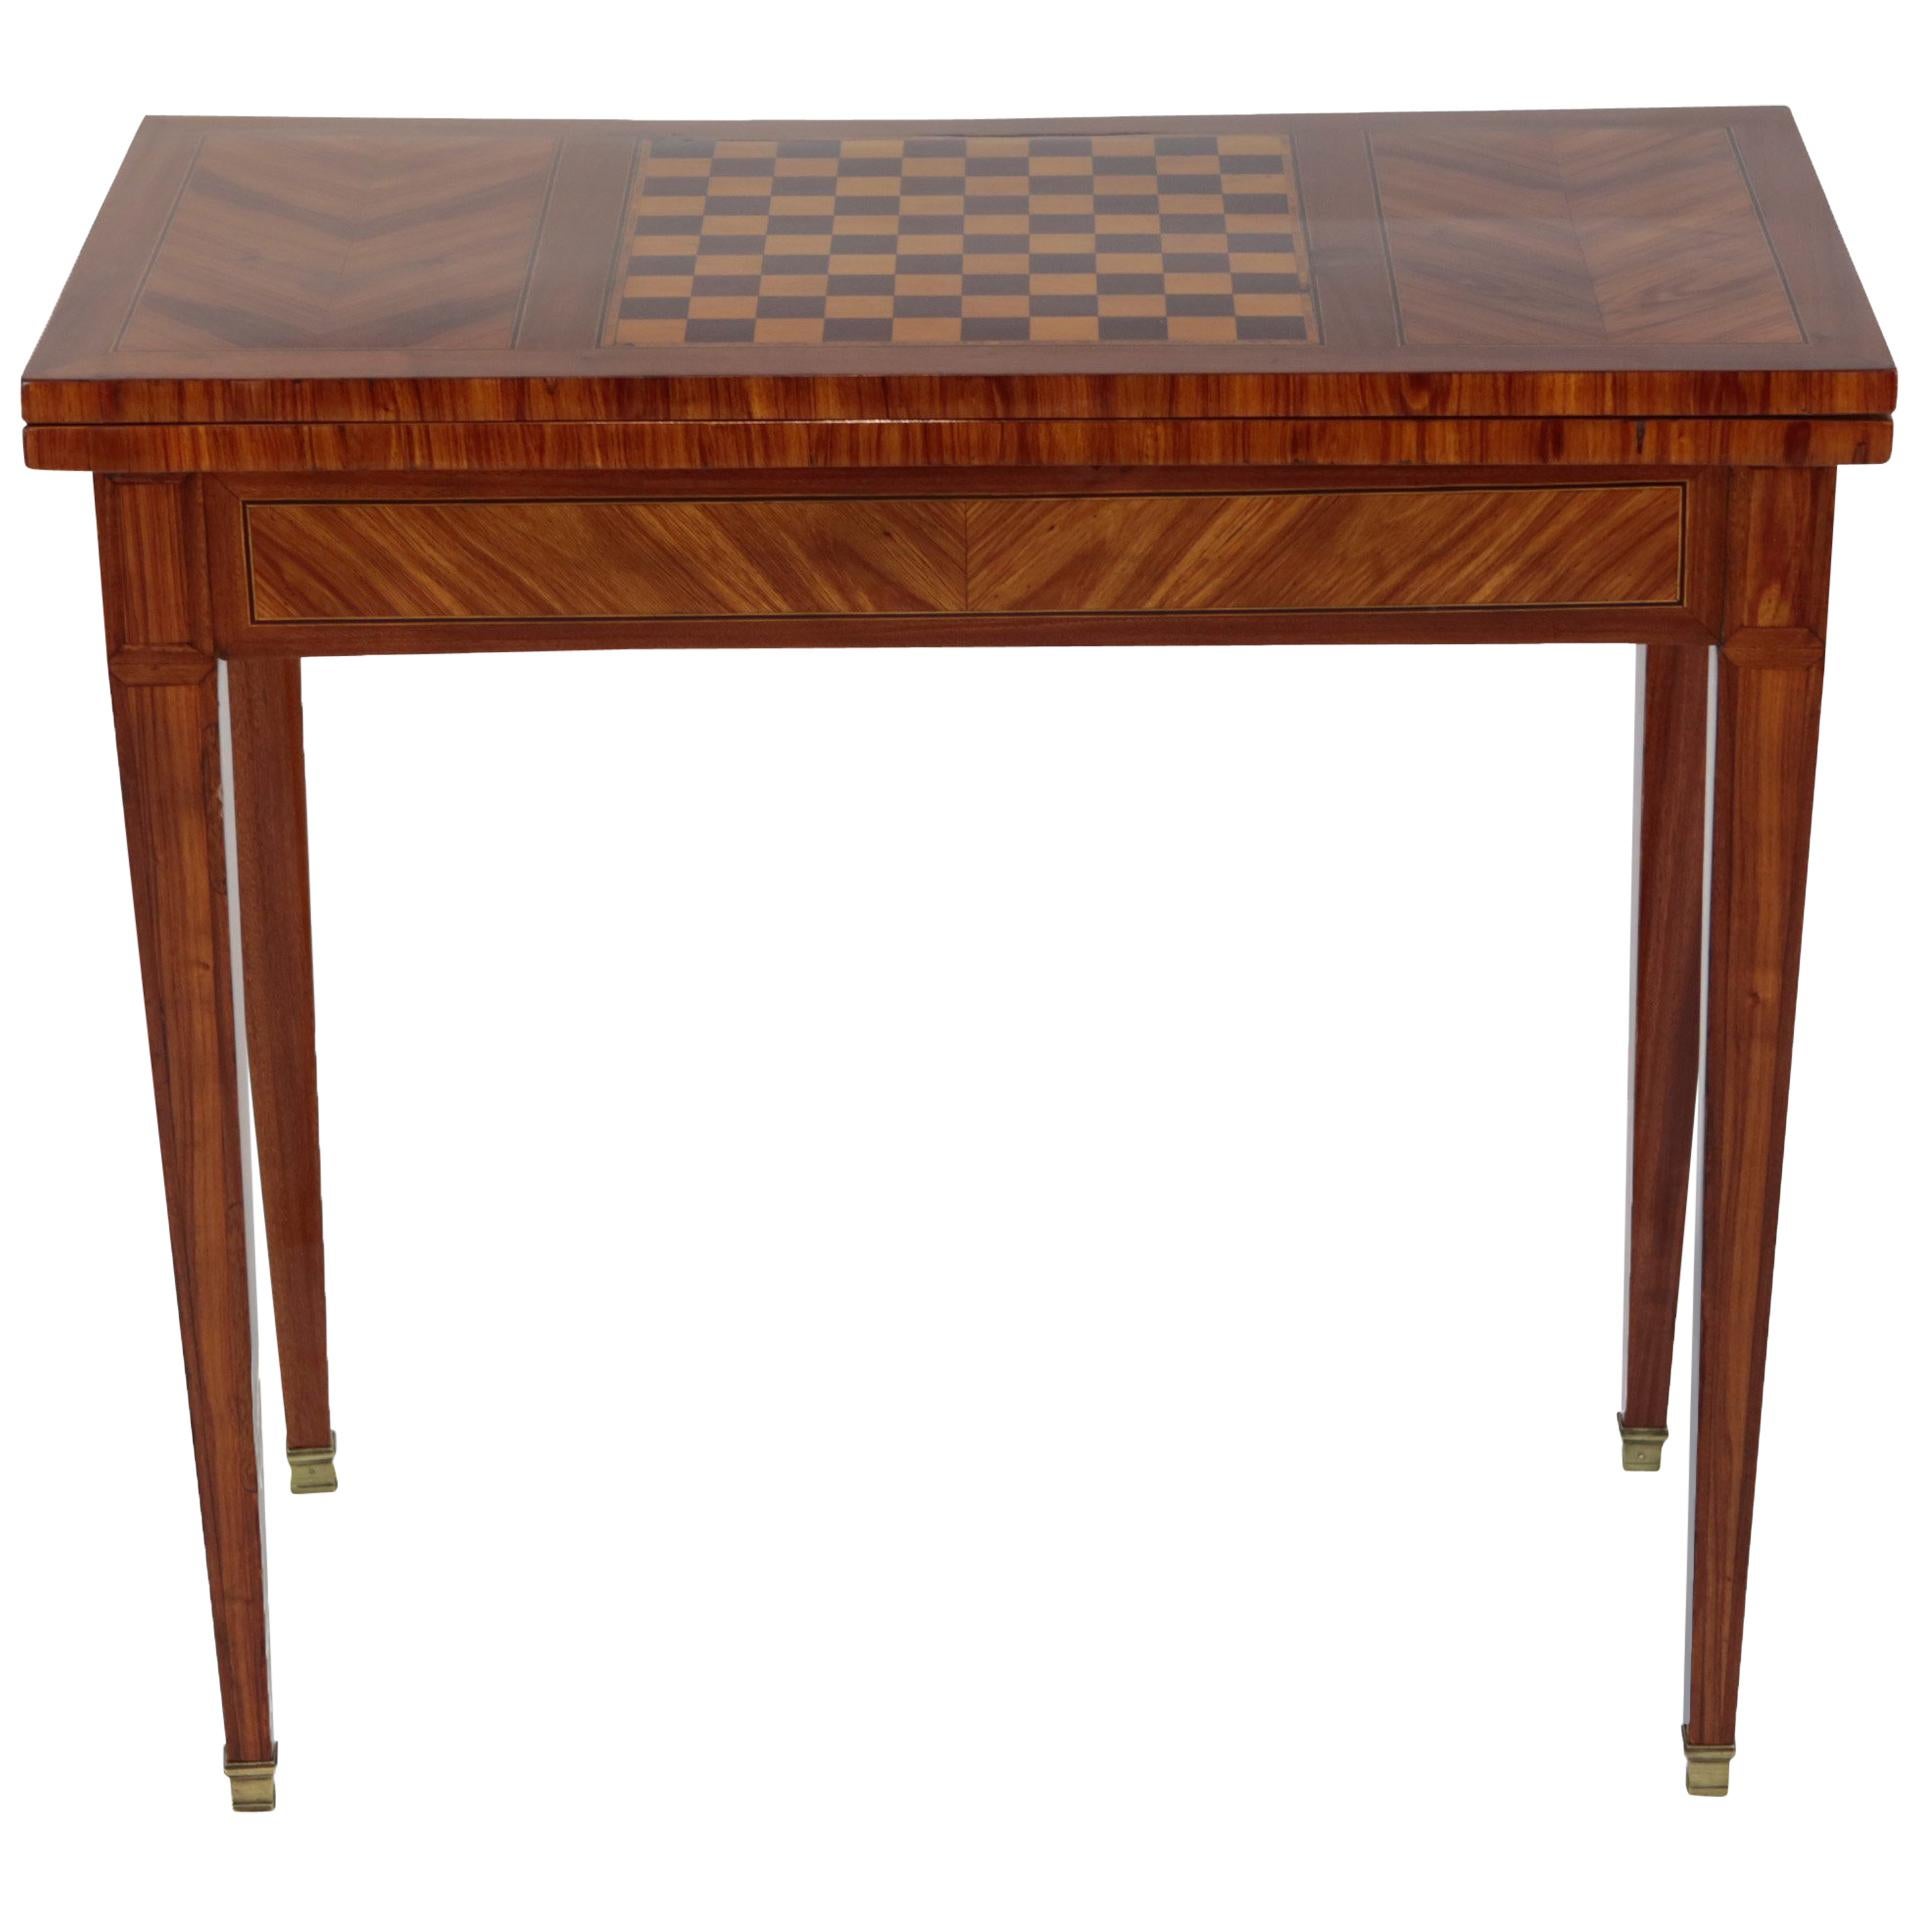 Foldable Game Table, France, Rosewood, circa 1850-1860